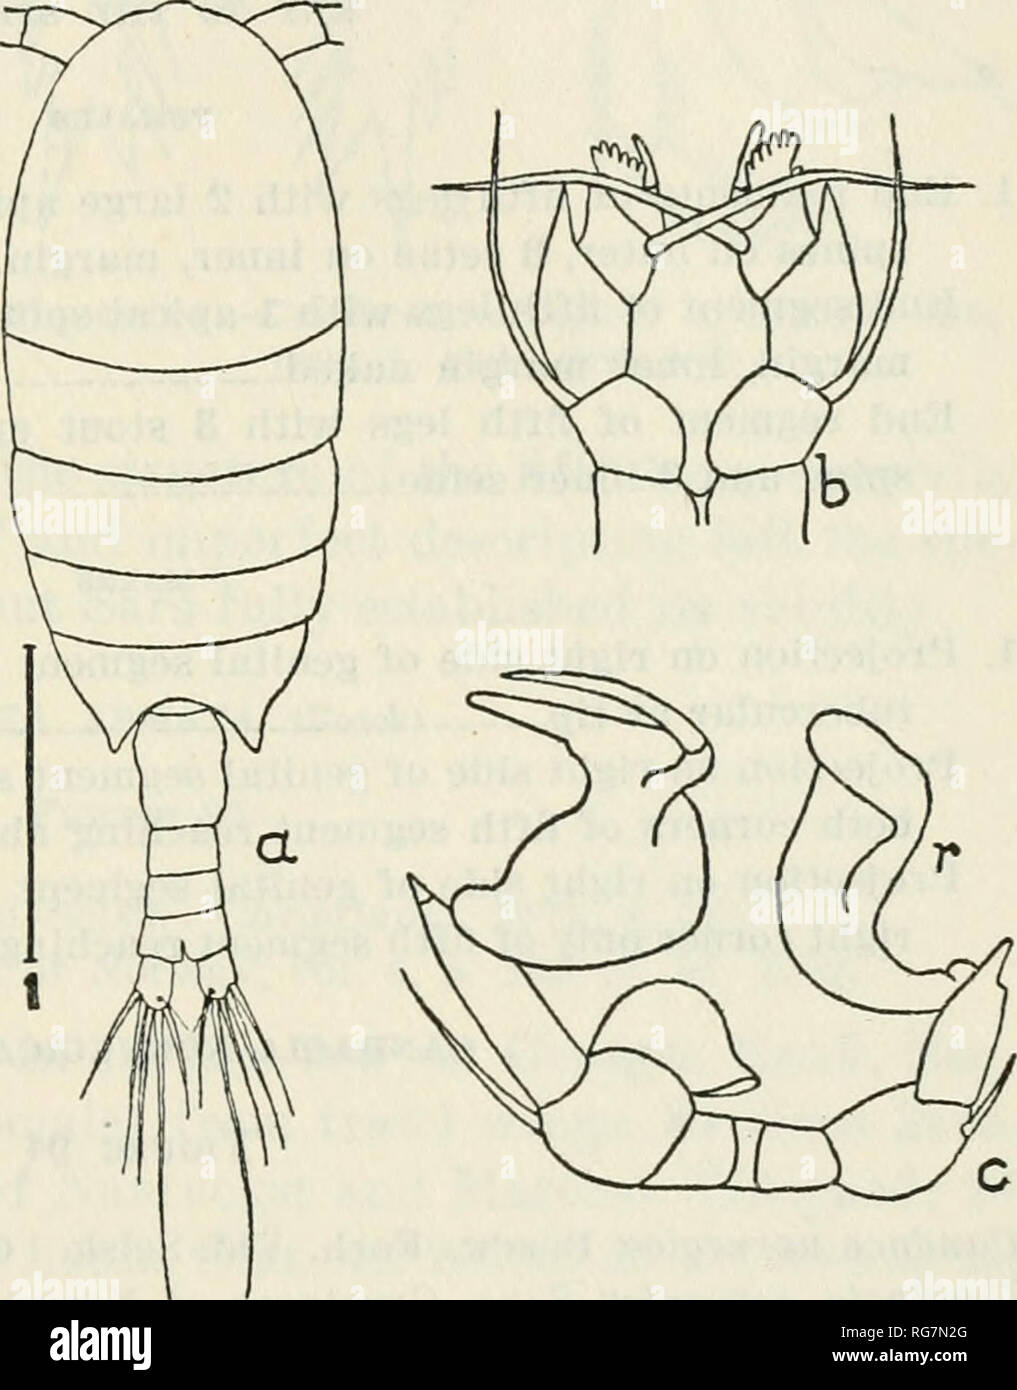 . Bulletin - United States National Museum. Science. COPEPODS OF THE WOODS HOLE REGION PHYLLOPUS BIDENTATUS Brady Figure 93 137 S. Challmyer, vol. 8, pt. 23, Scott, Siboya-Bxpeditie, 29a, Phyllopus Udentatus Brady, Voyage of H. M. Copepoda, p. 78, pi. 5, figs. 7-16, 1883.—A Copepoda, pt. 1, p. 147, pi. 45, figs. 1-9, 1909. Occurrence.—One female taken in a vertical haul, Station 20107, Grampus, off Georges Bank. Distribution.—South Atlantic, off Buenos Aires (Brady) ; Gala- pagos Islands (Giesbrecht) ; northern Atlantic (Wolfenden) ; Cali- fornia coast (Esterly) ; Gulf of Guinea (T. Scott) ; M Stock Photo